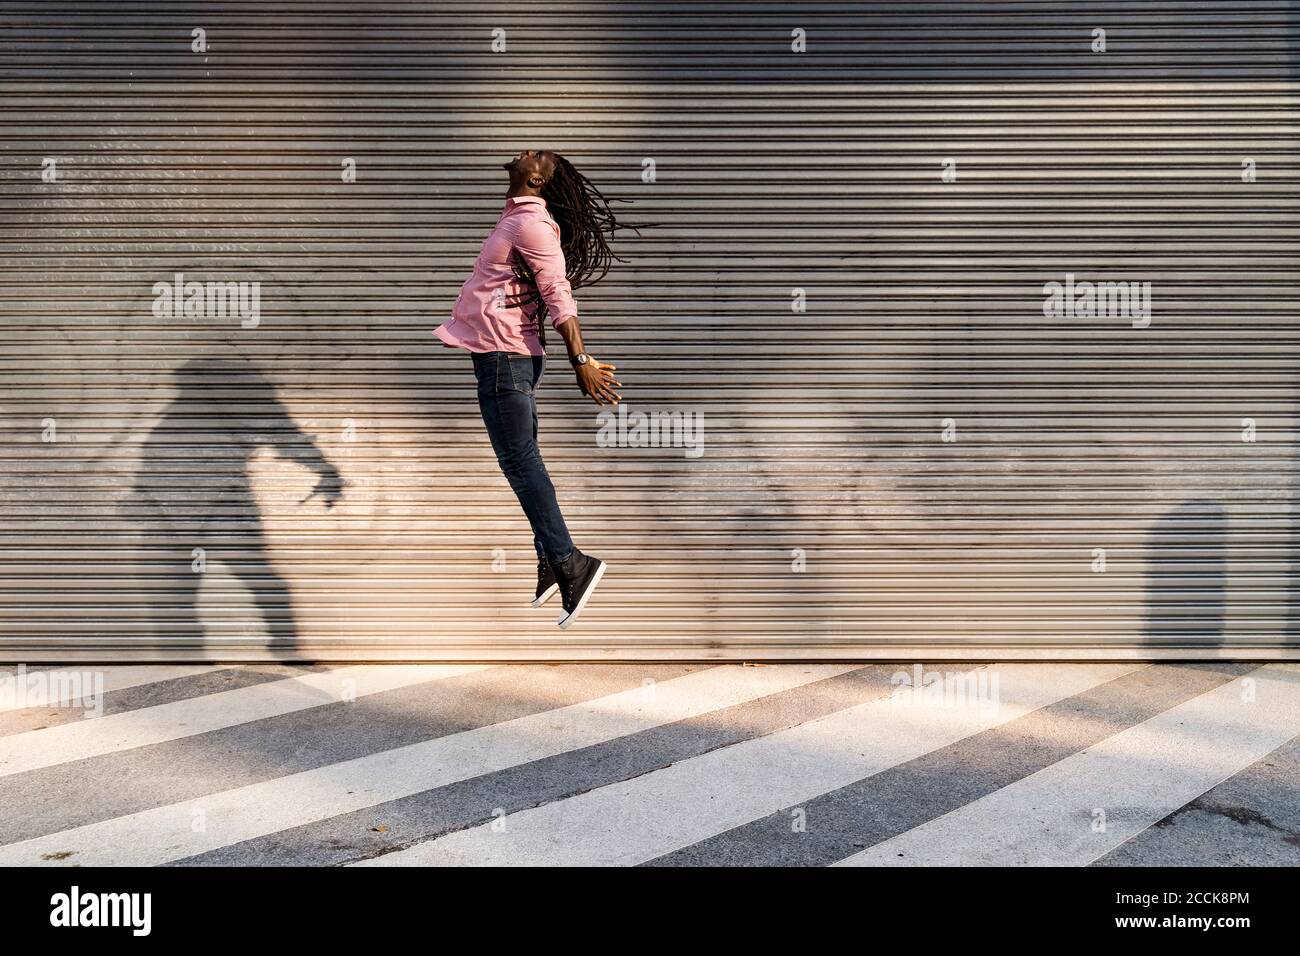 Carefree young man with dreadlocks jumping on street against wall Stock Photo